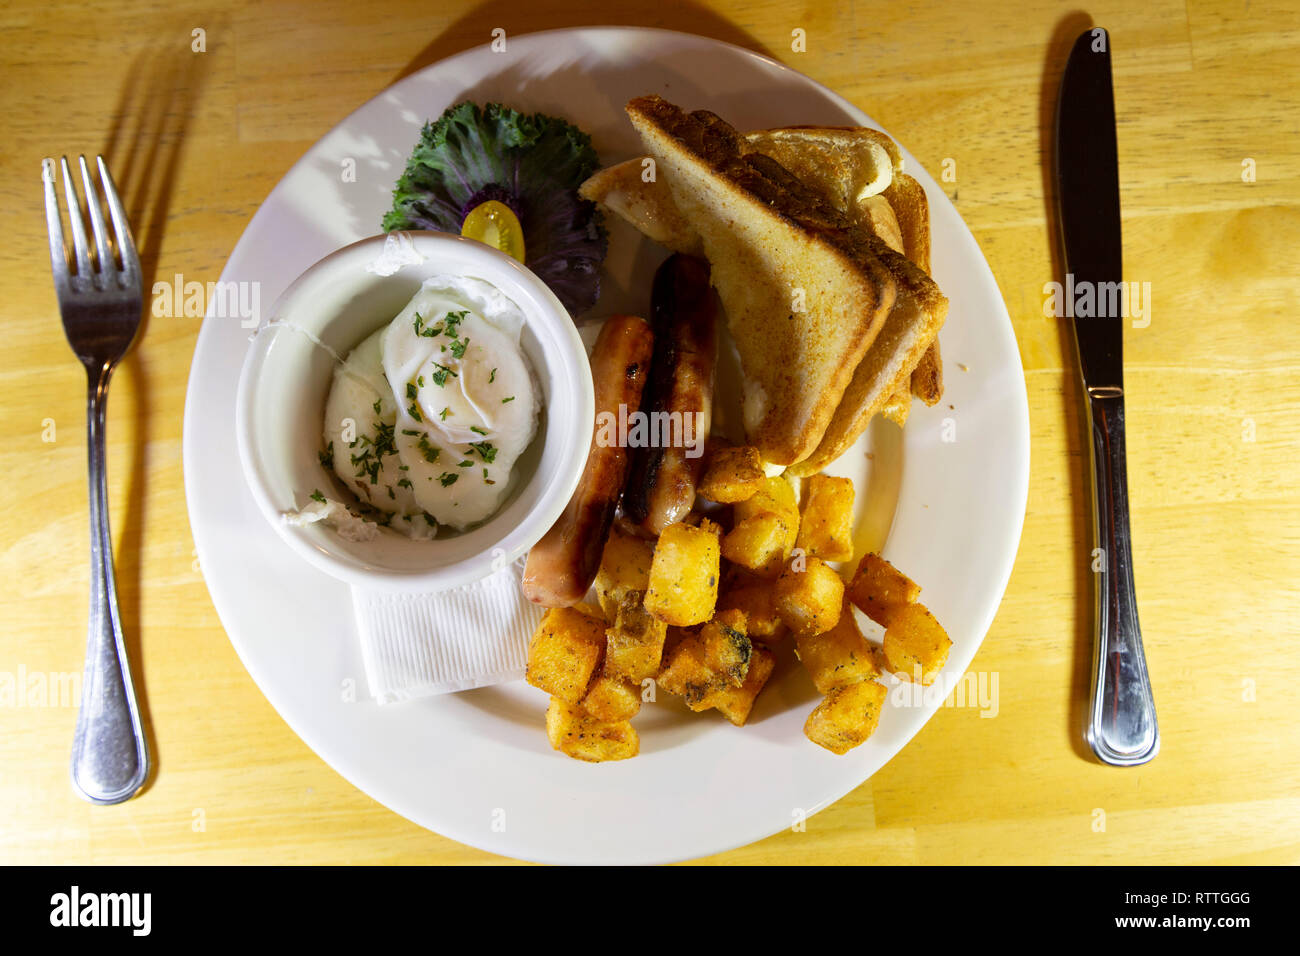 A Canadian breakfast served in Manitoba, Canada. It features sausages, a poached egg, toast and hash potatoes. Stock Photo